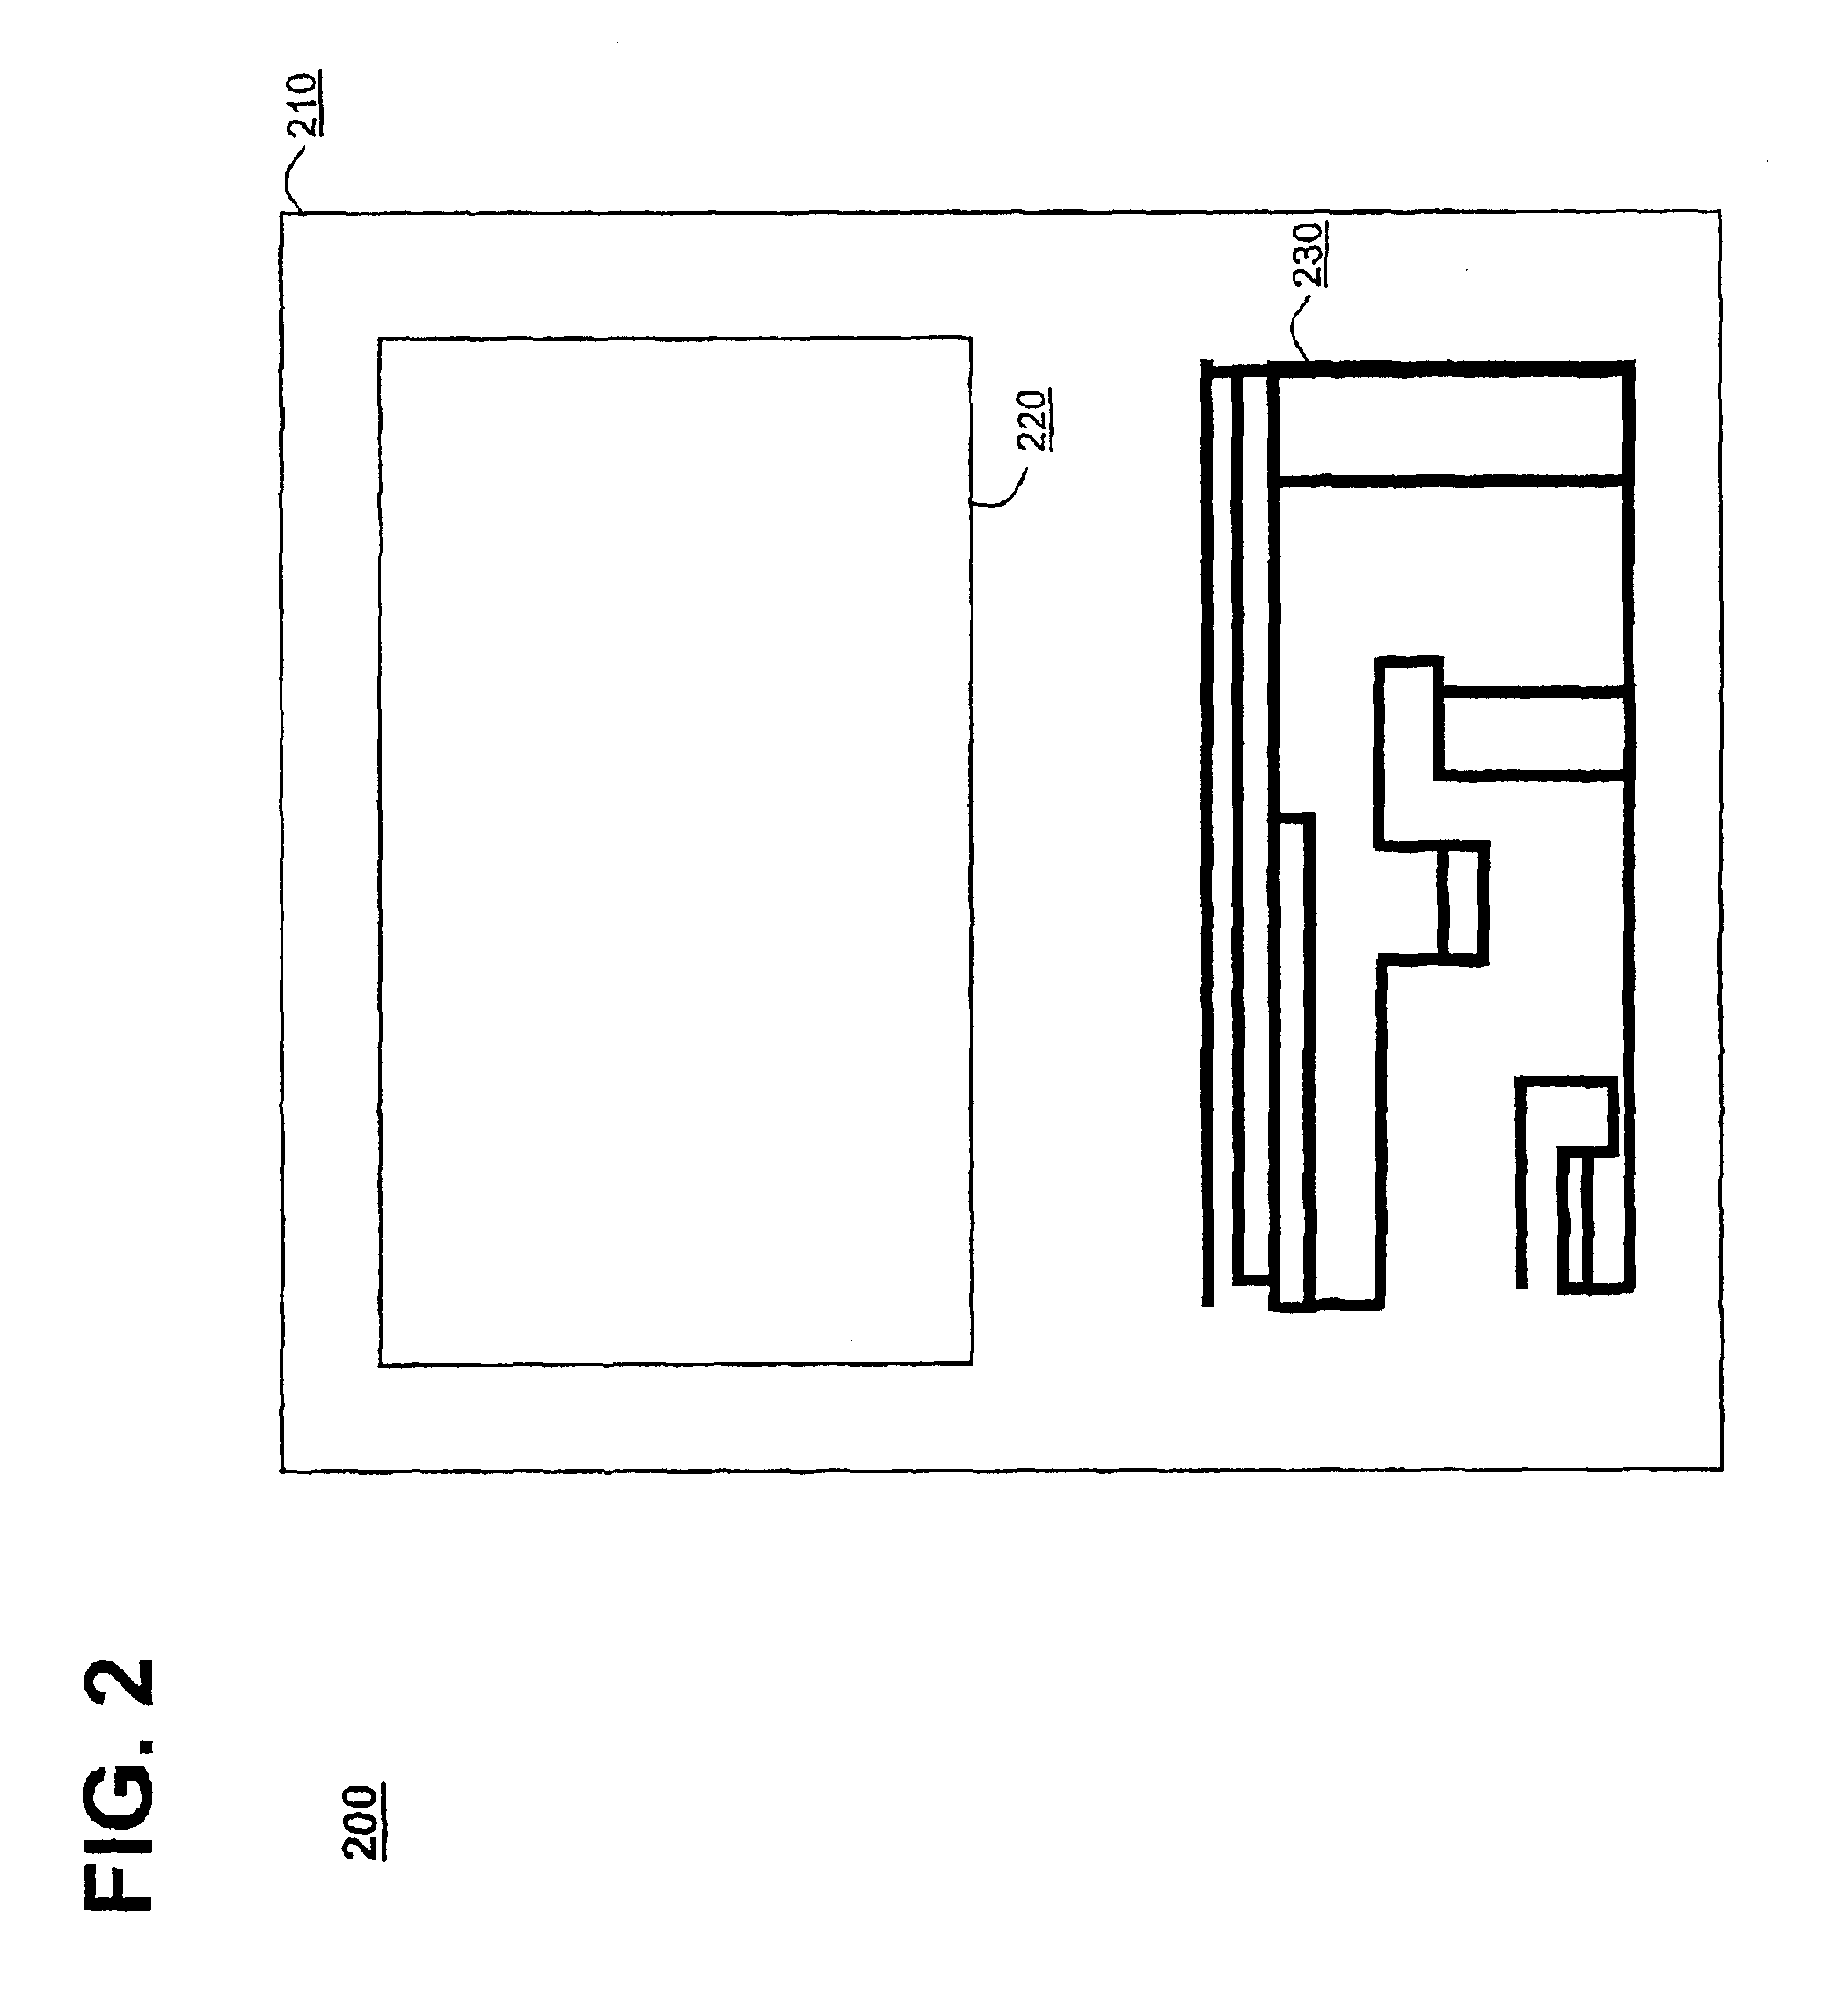 Method and system for transmitting and displaying information on a wireless device using plastic electronics